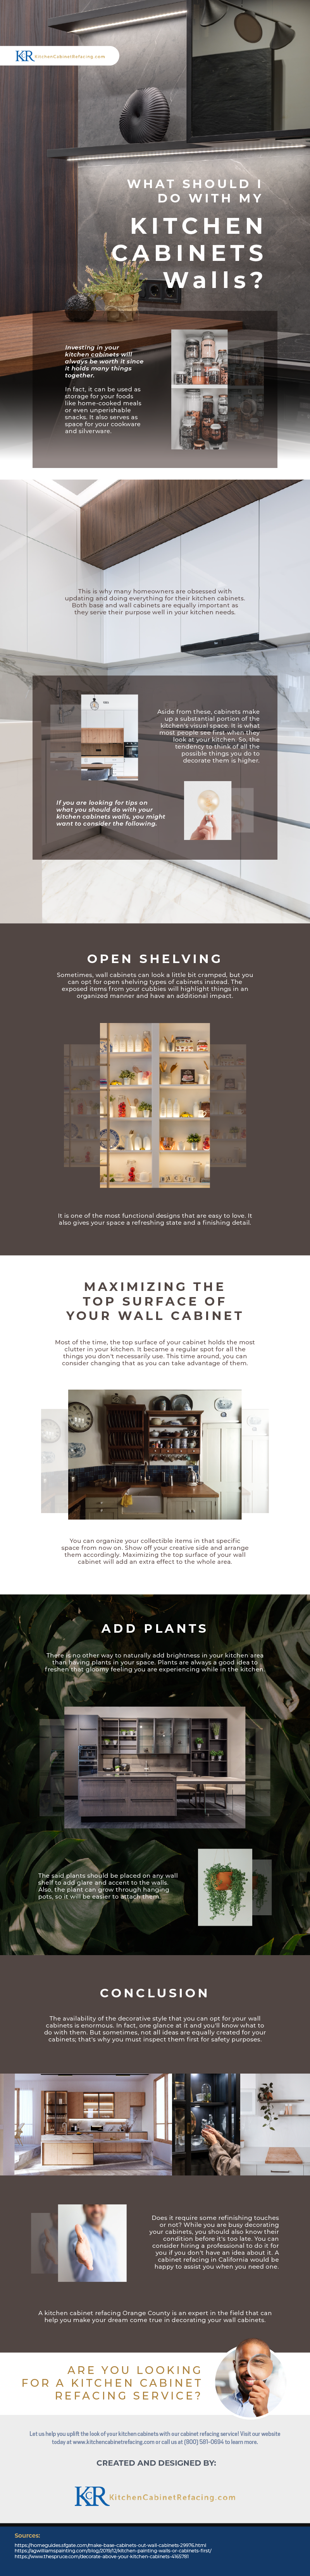 What_Should_I_do_With_My_Kitchen_Cabinets_Walls_infographic_image